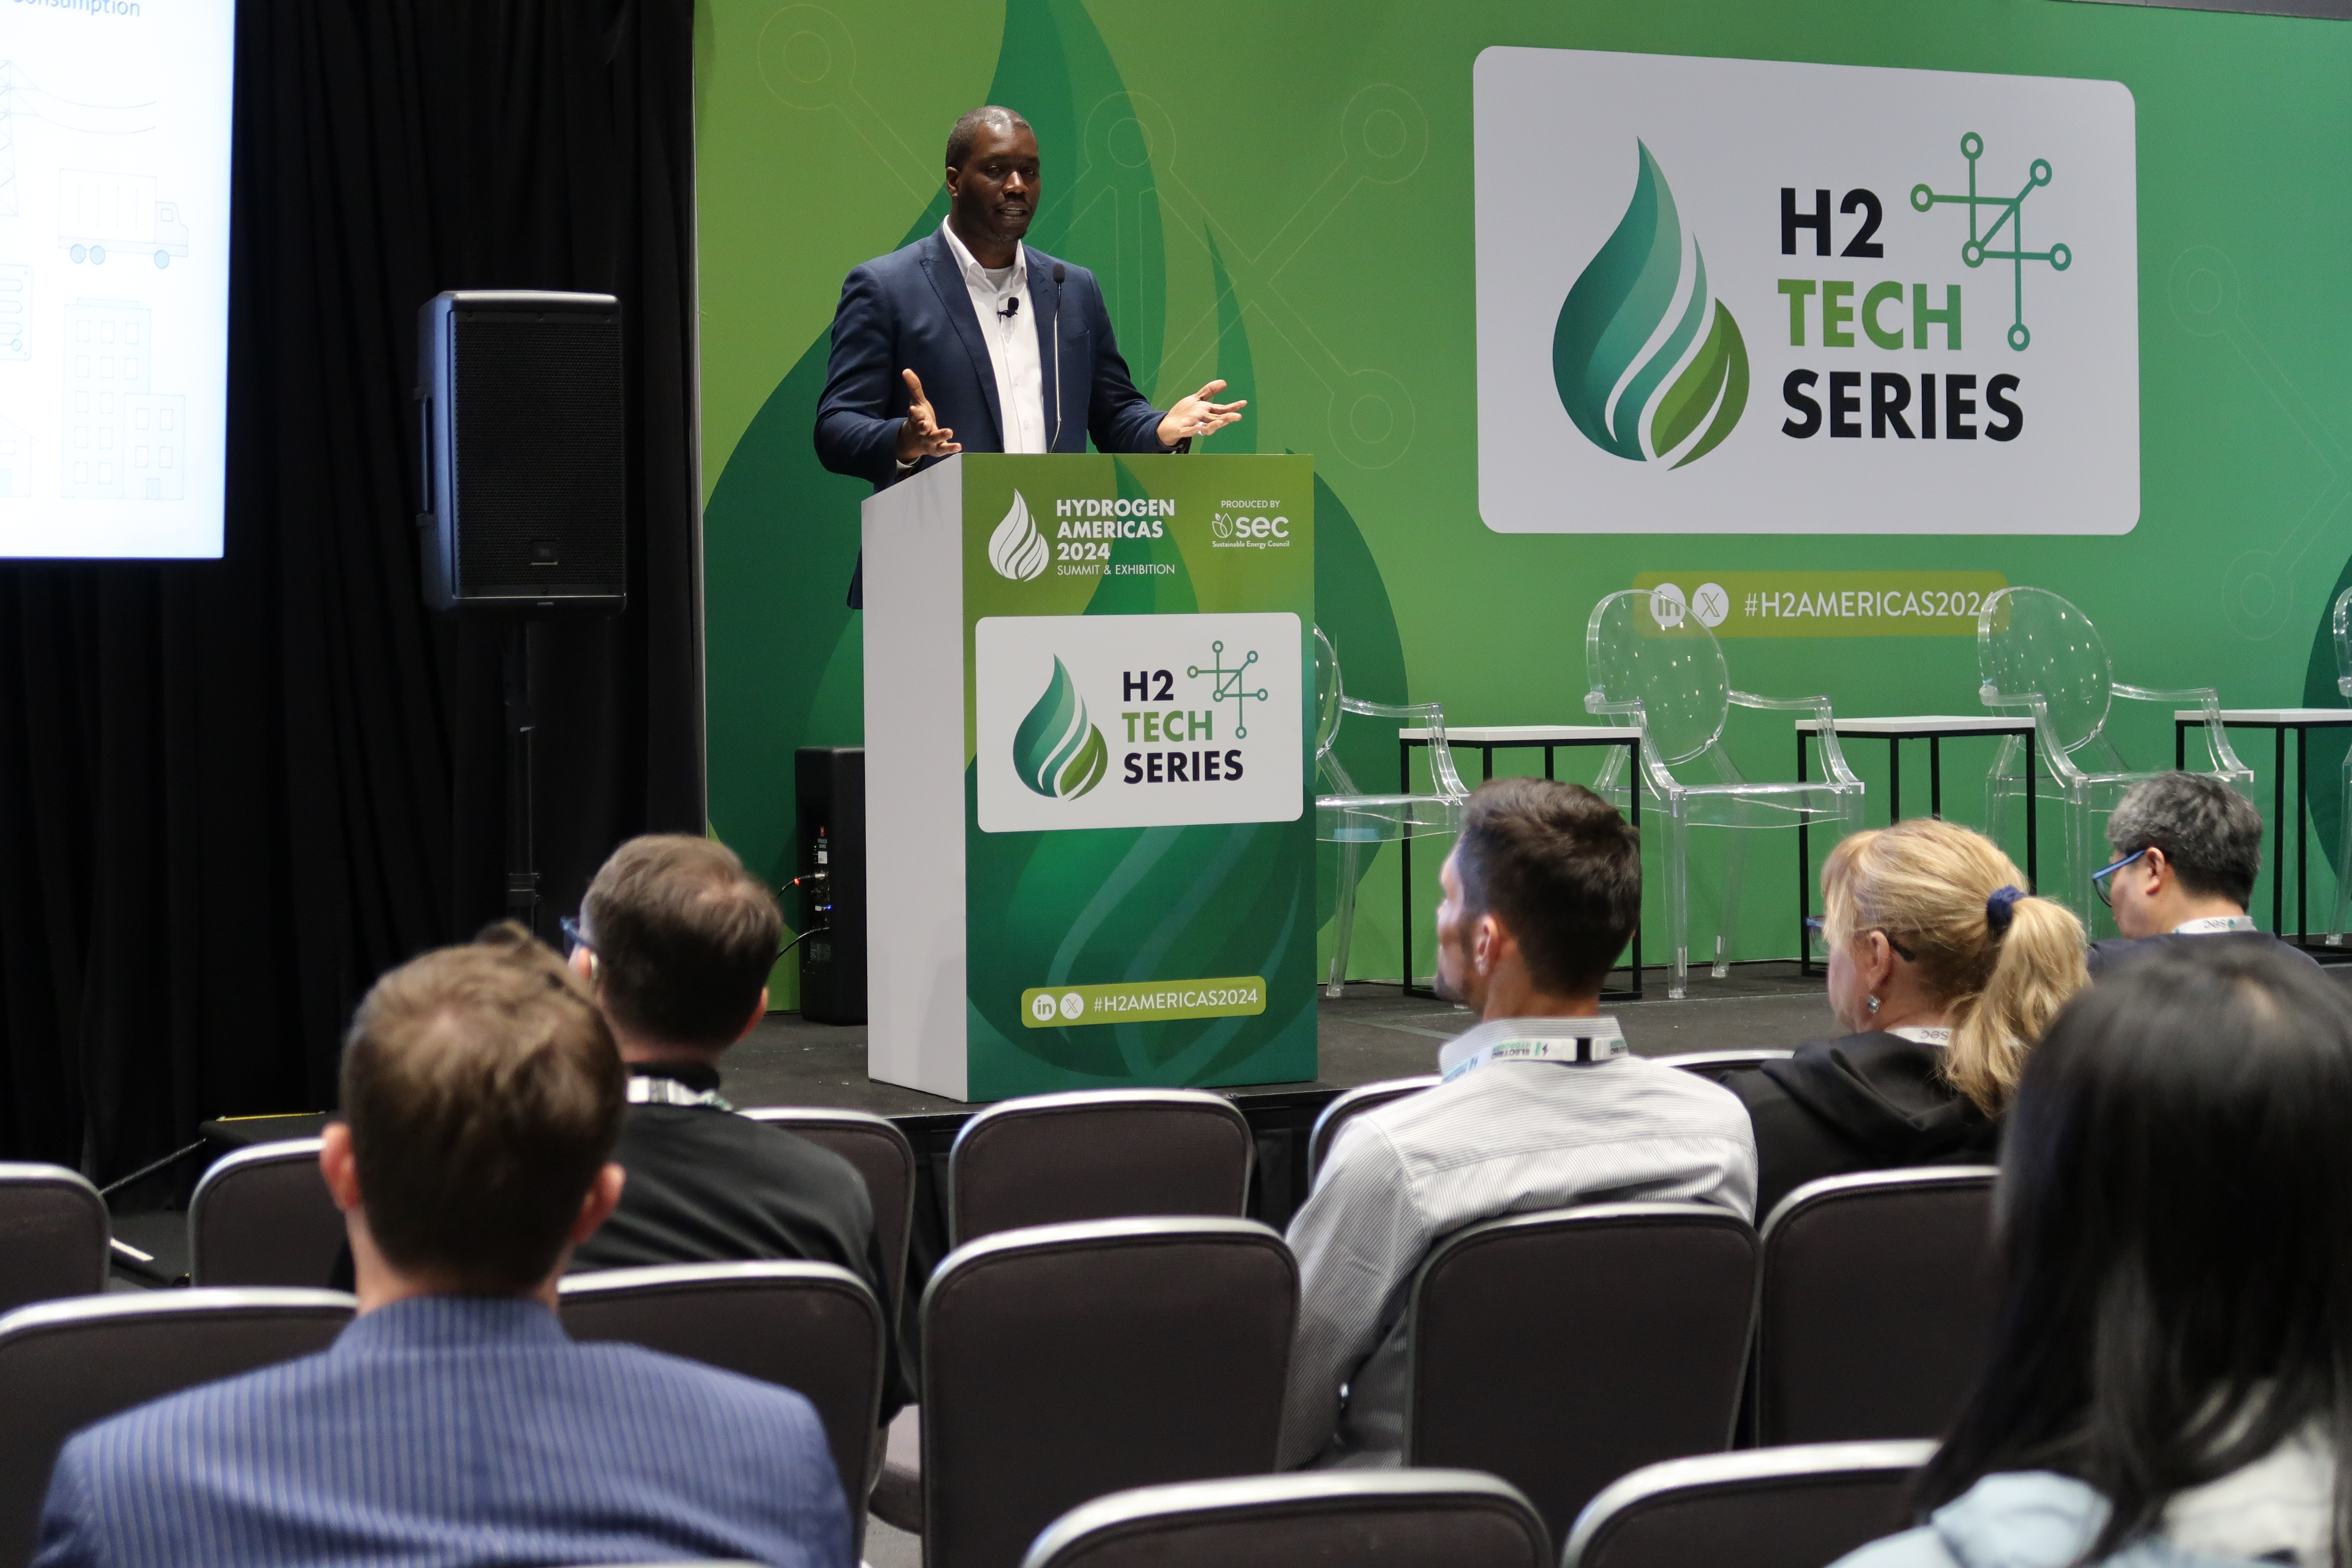 A speaker presenting on the H2 Tech Series stage.